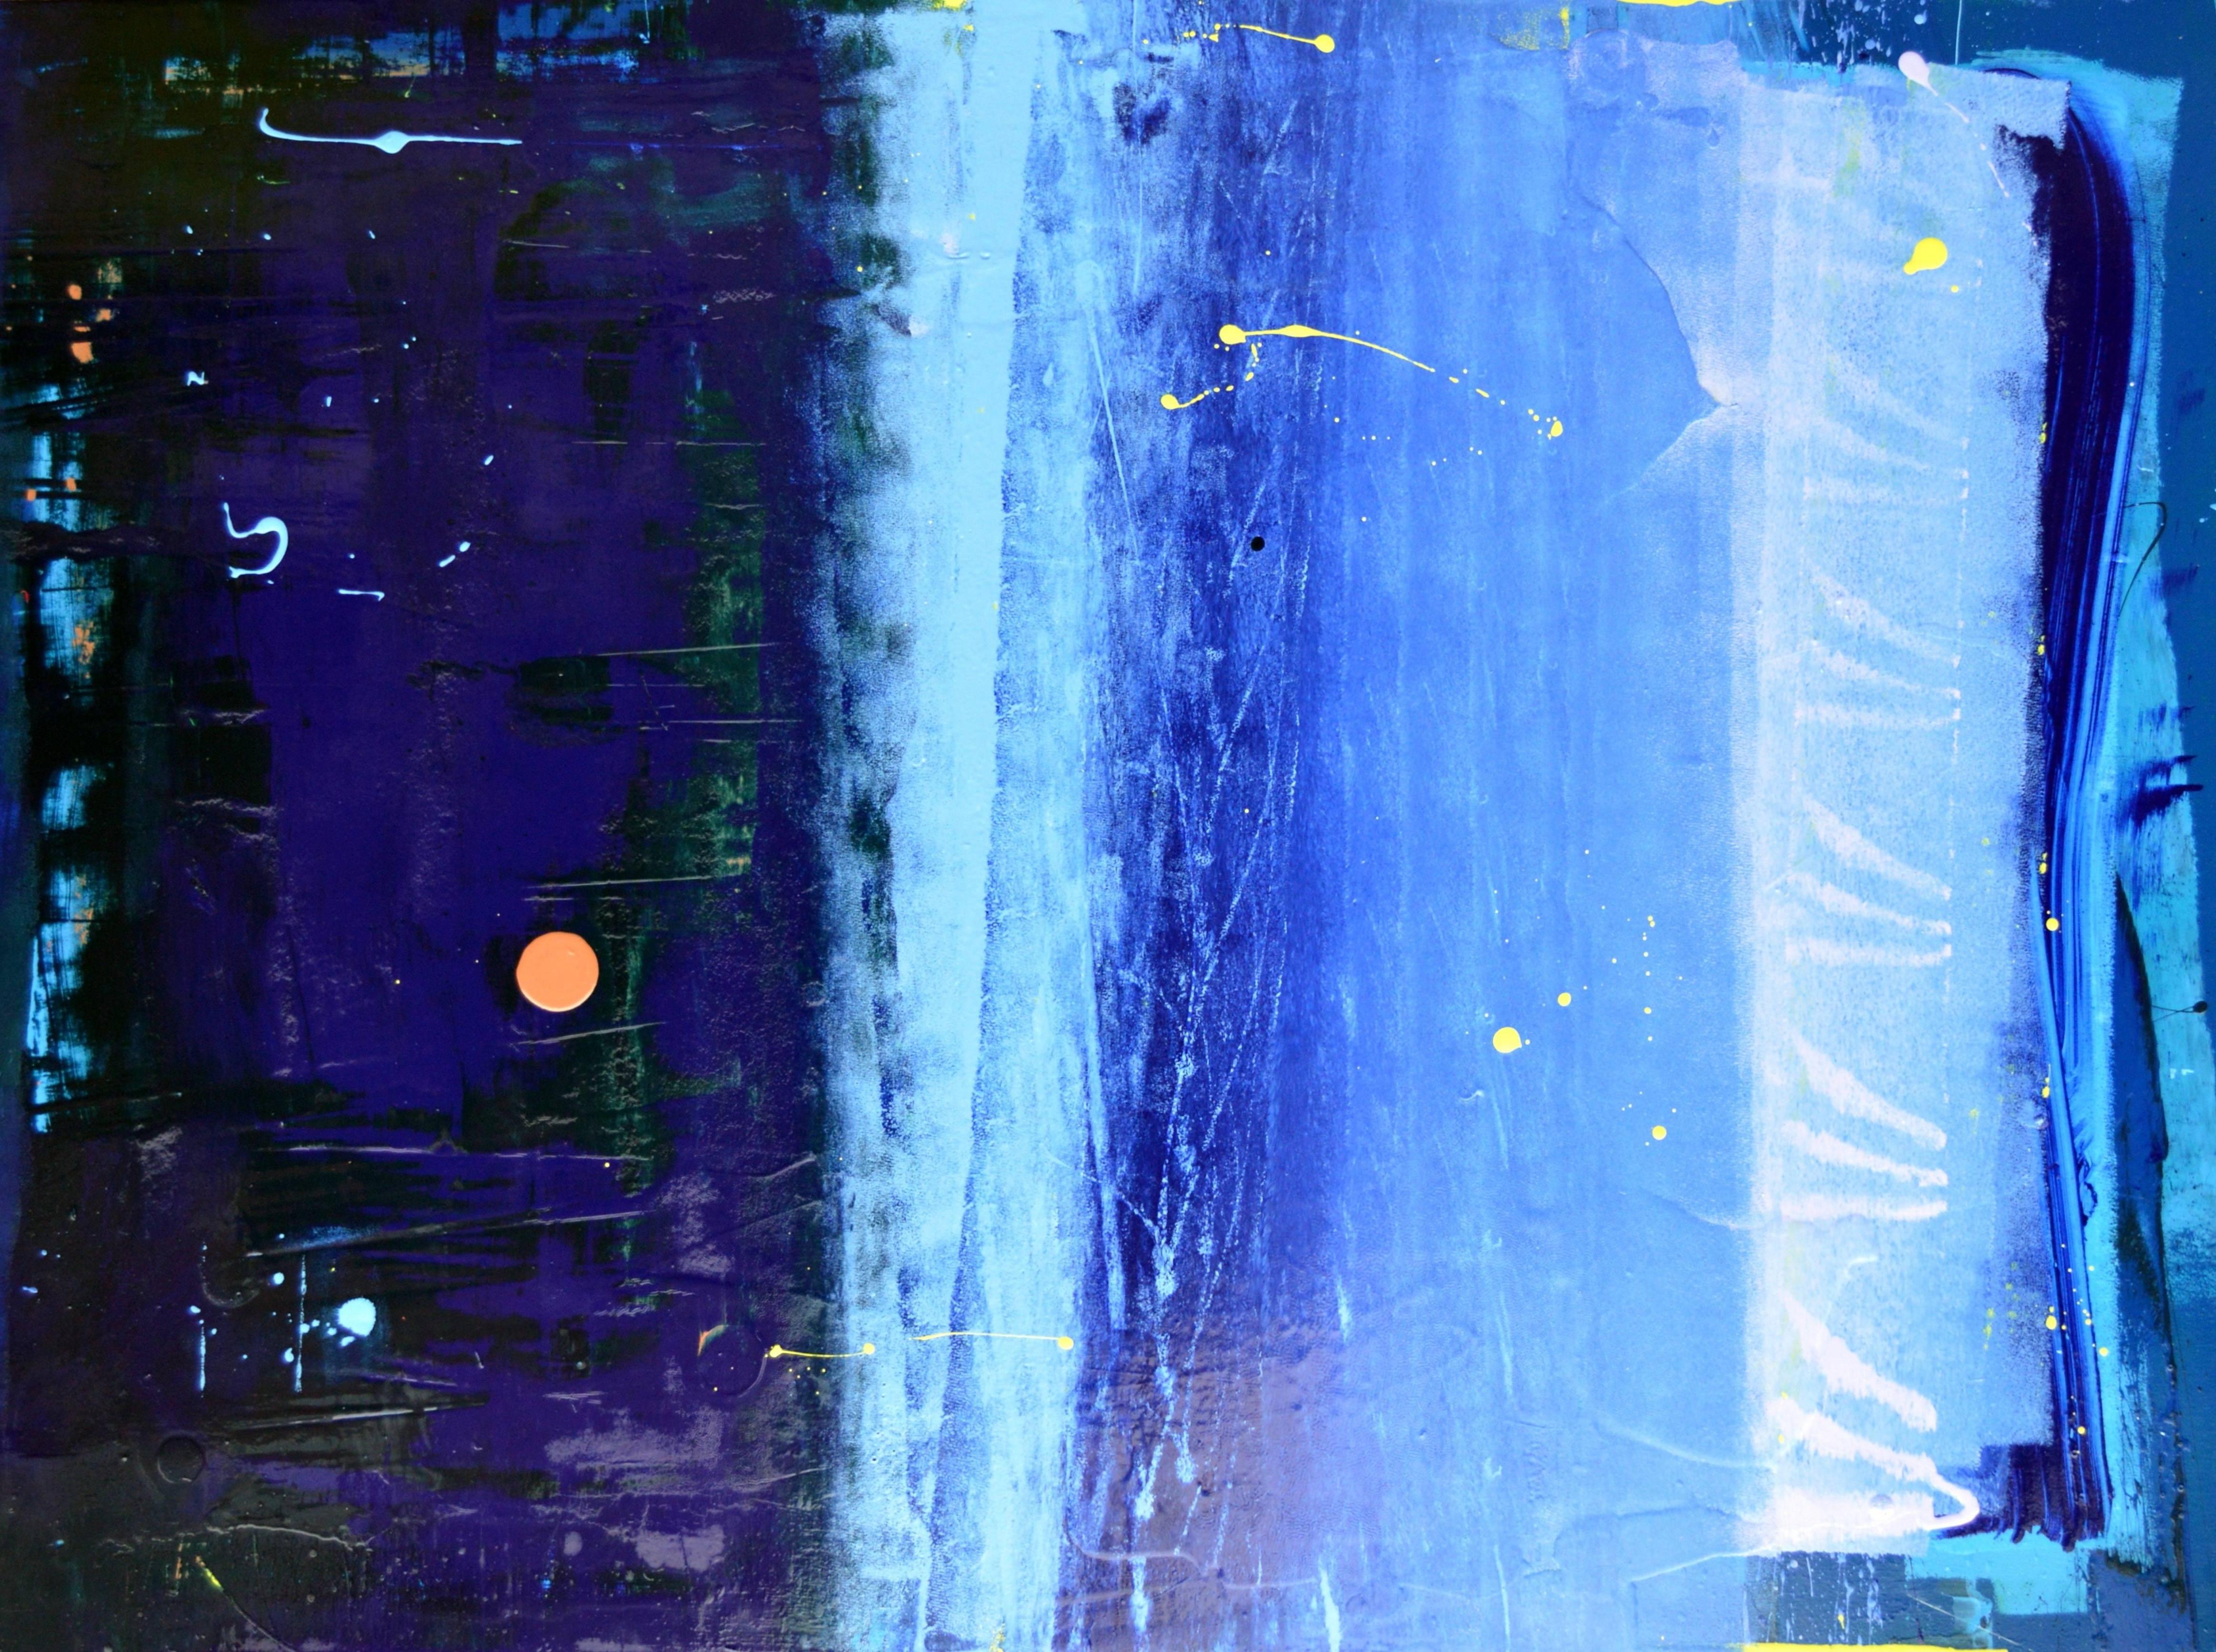 Anthony Hunter
The Right Blue Moonlight at Night with Little Red Blob Painting
Gloss on Panel
66.5" x 49.5" (Piece can be vertical or horizontal)

